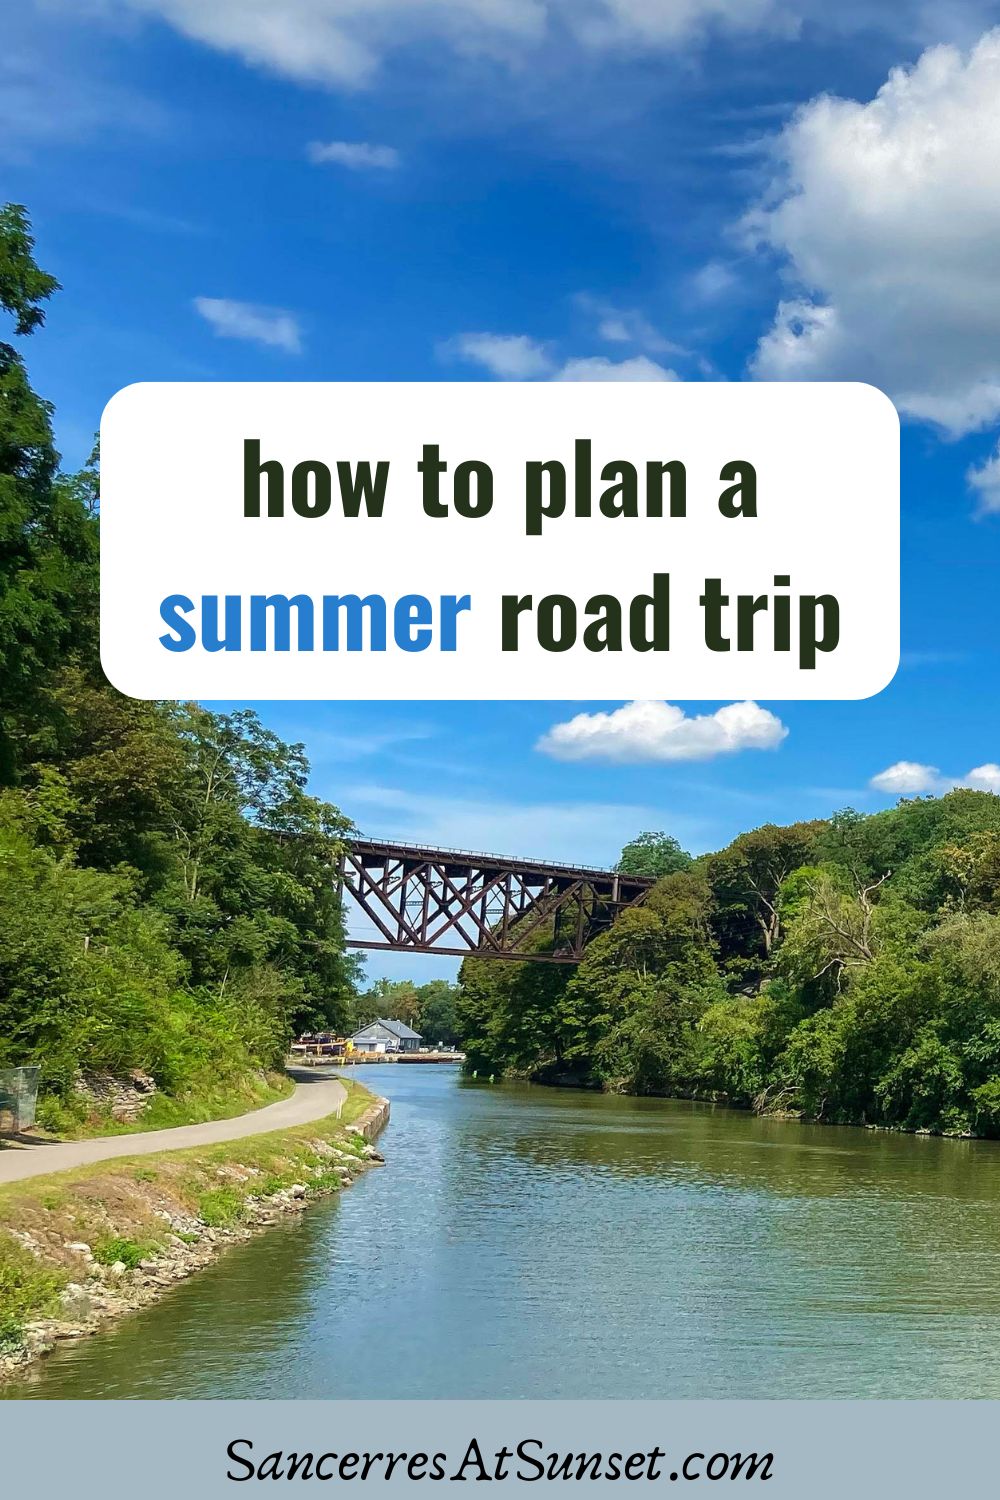 How to Plan a Summer Road Trip